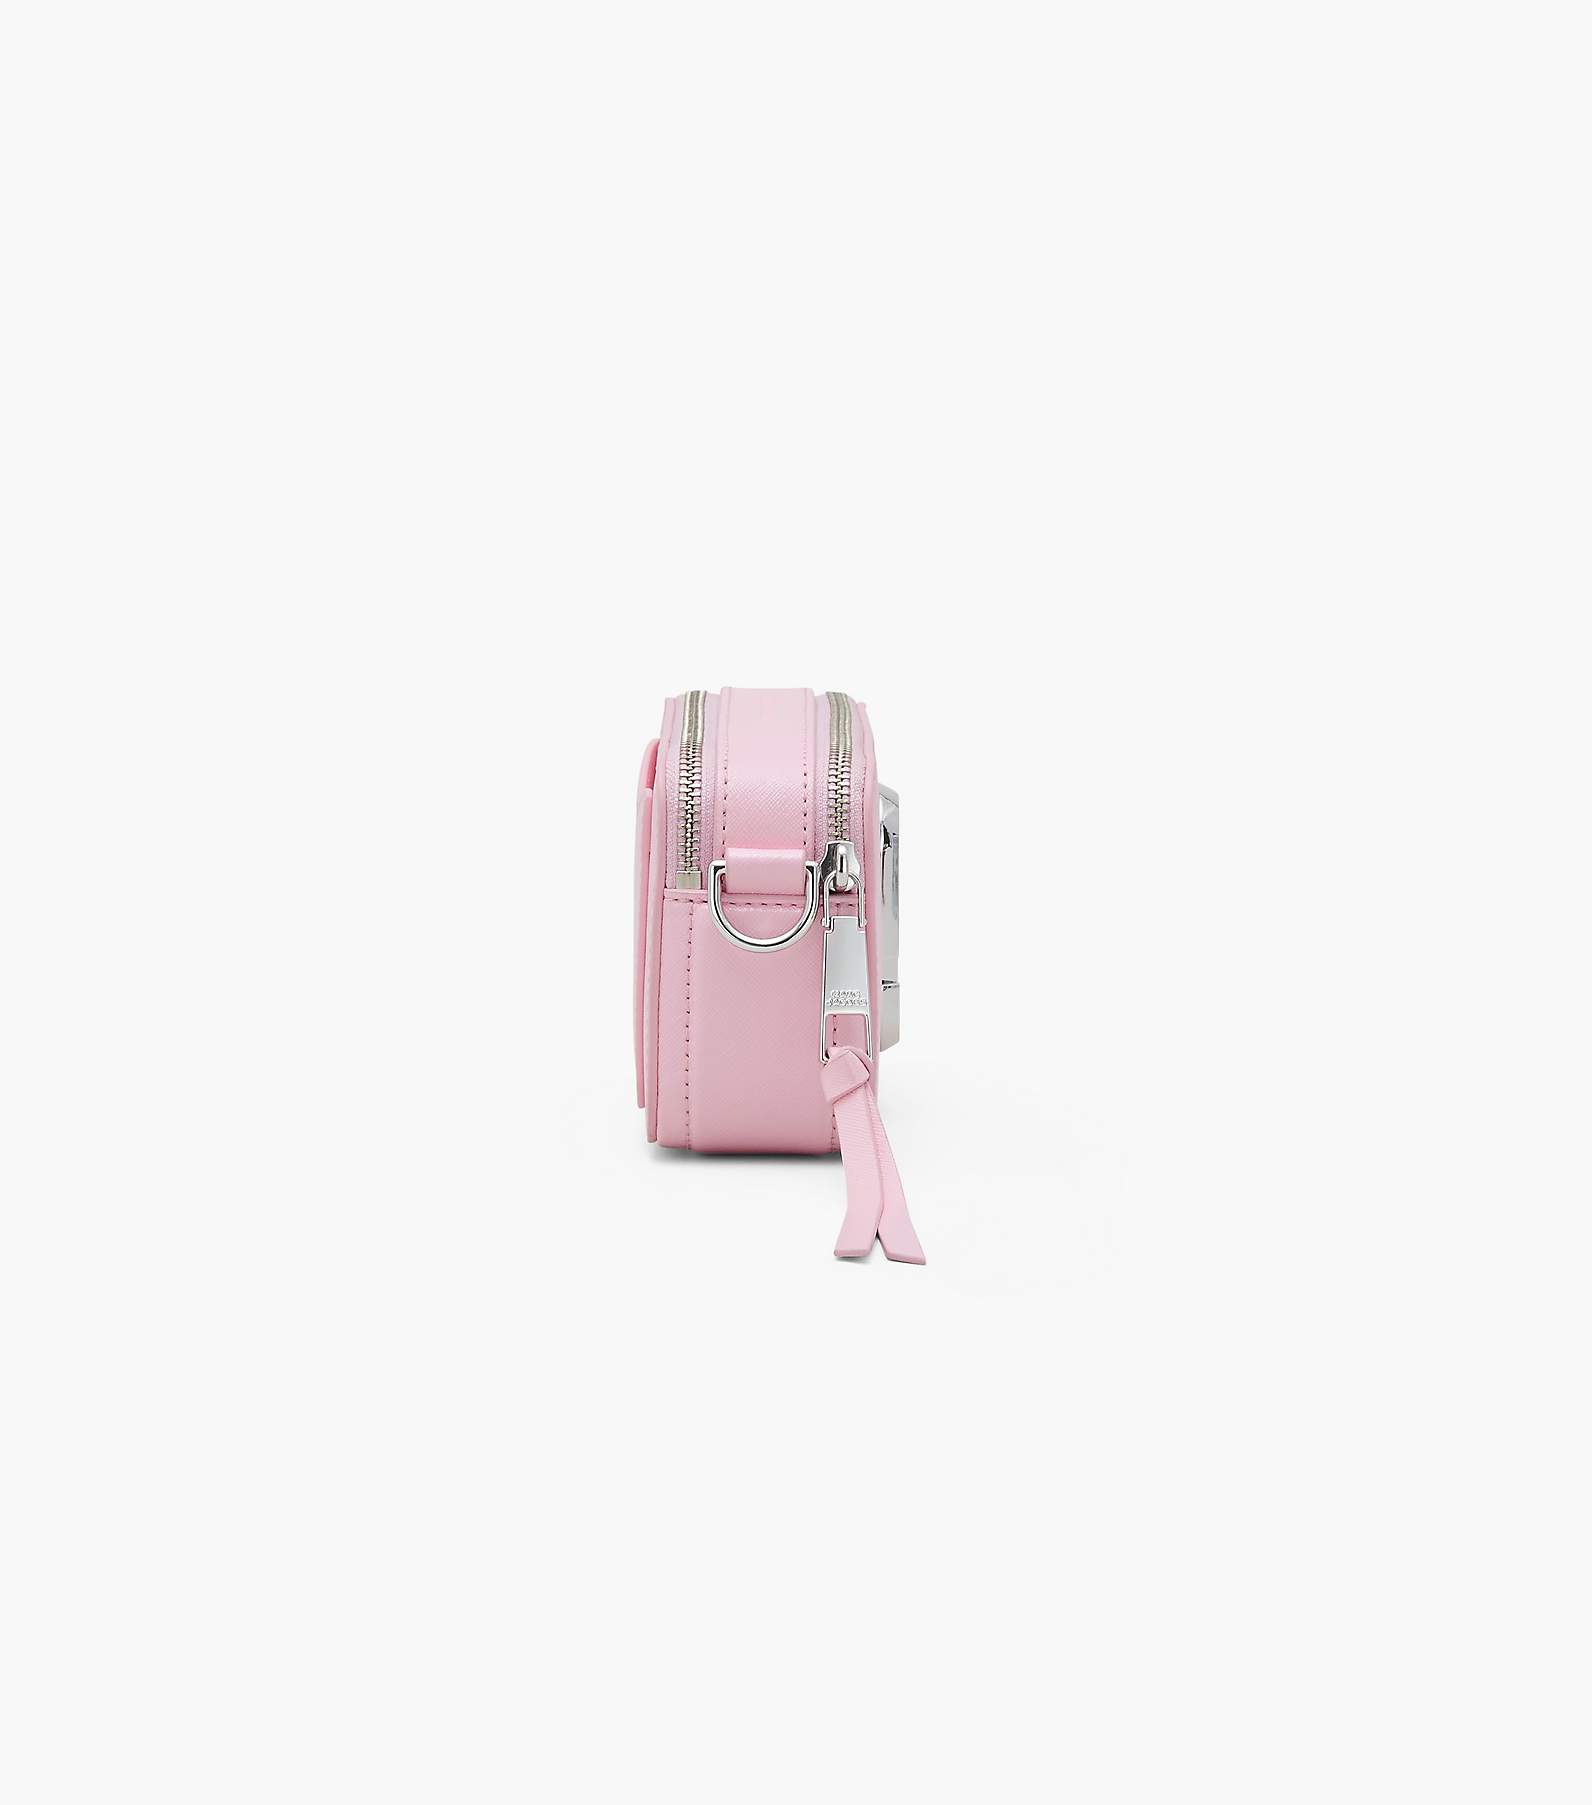 Find Out Where To Get The Dress  Marc jacobs snapshot bag, Bags